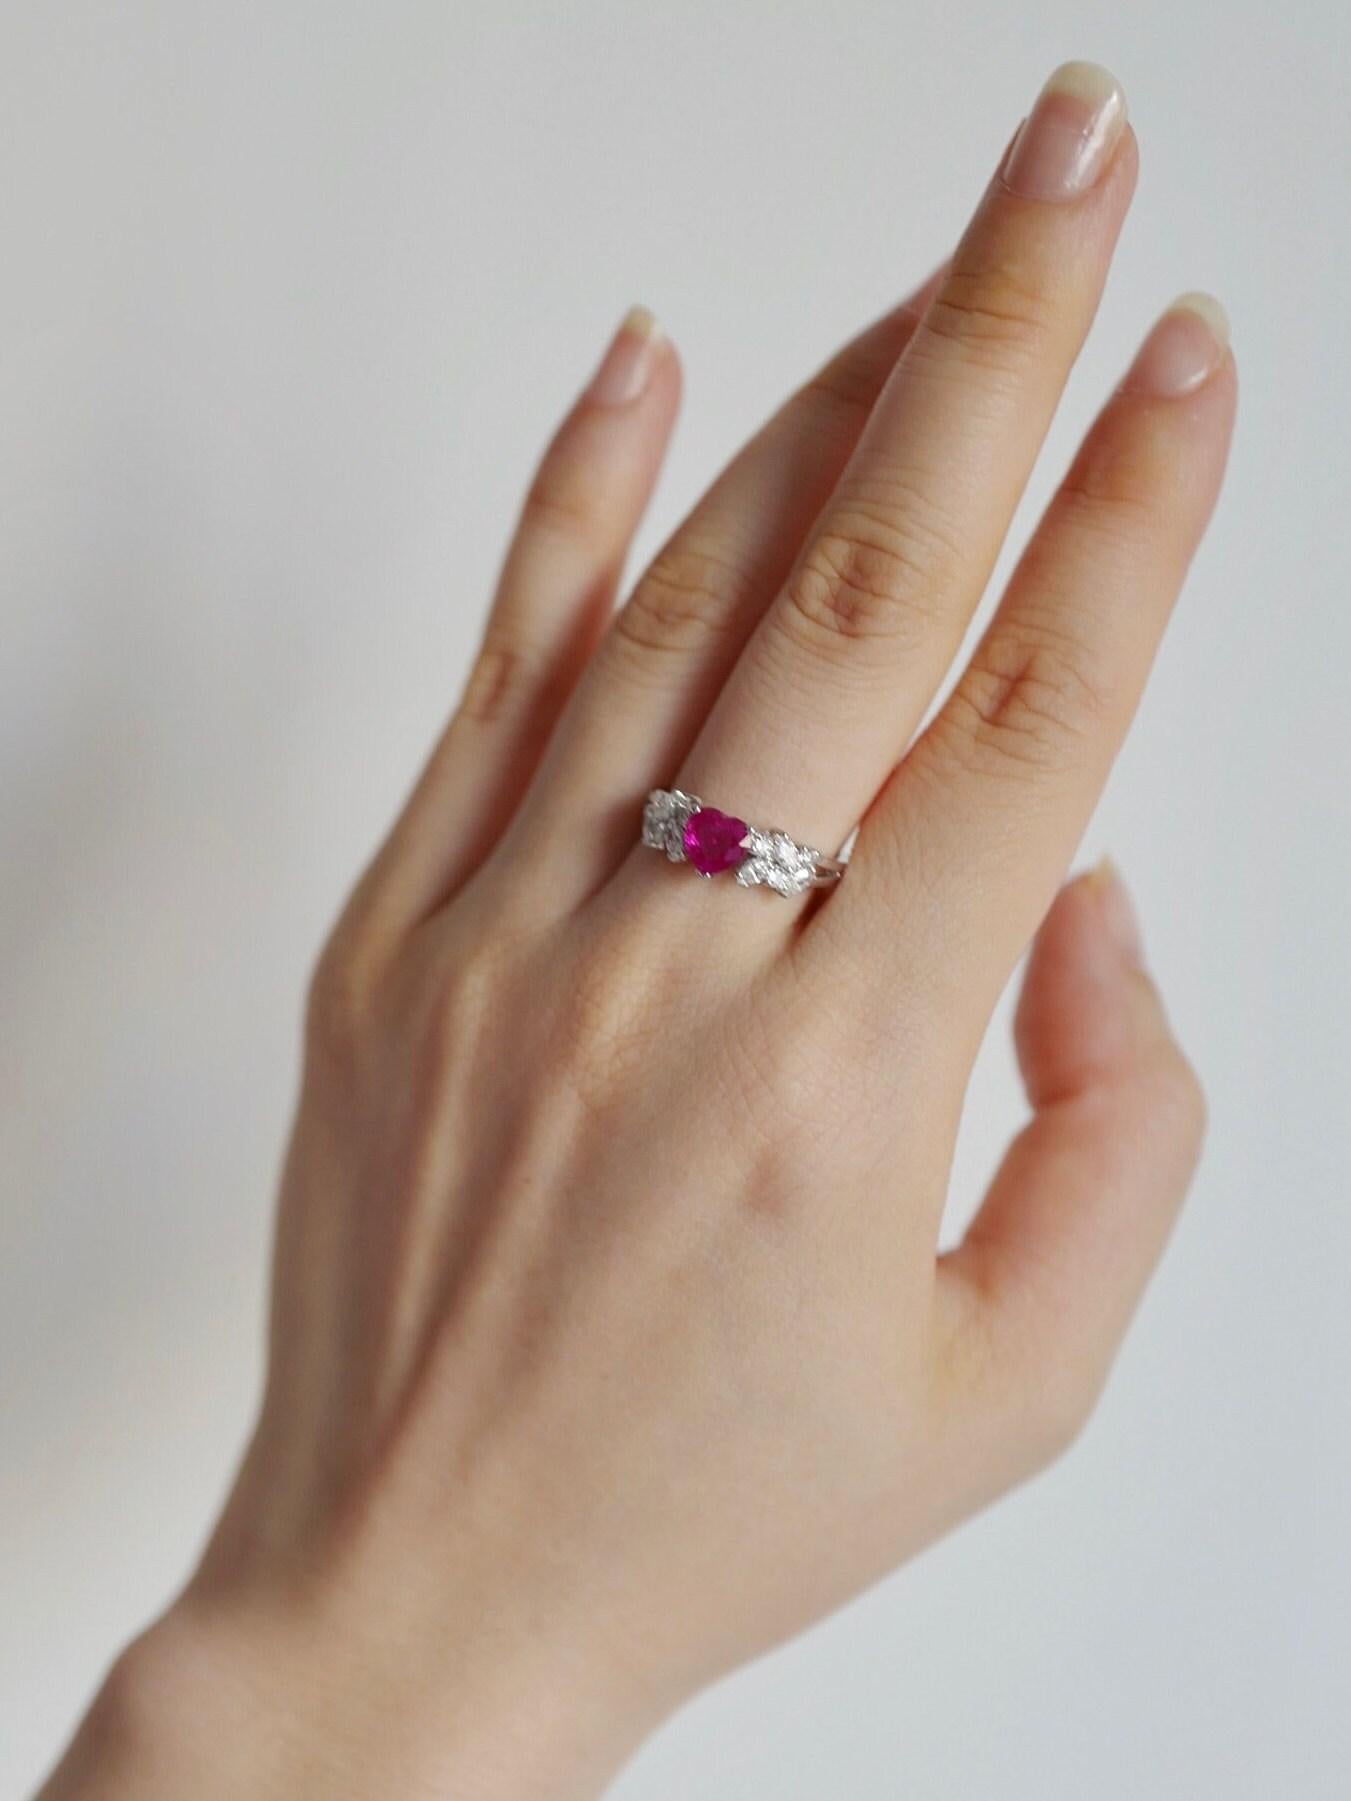 For Sale:  Heart Shaped Ruby Ring with Marquise Diamond Accents in 18k white gold 4